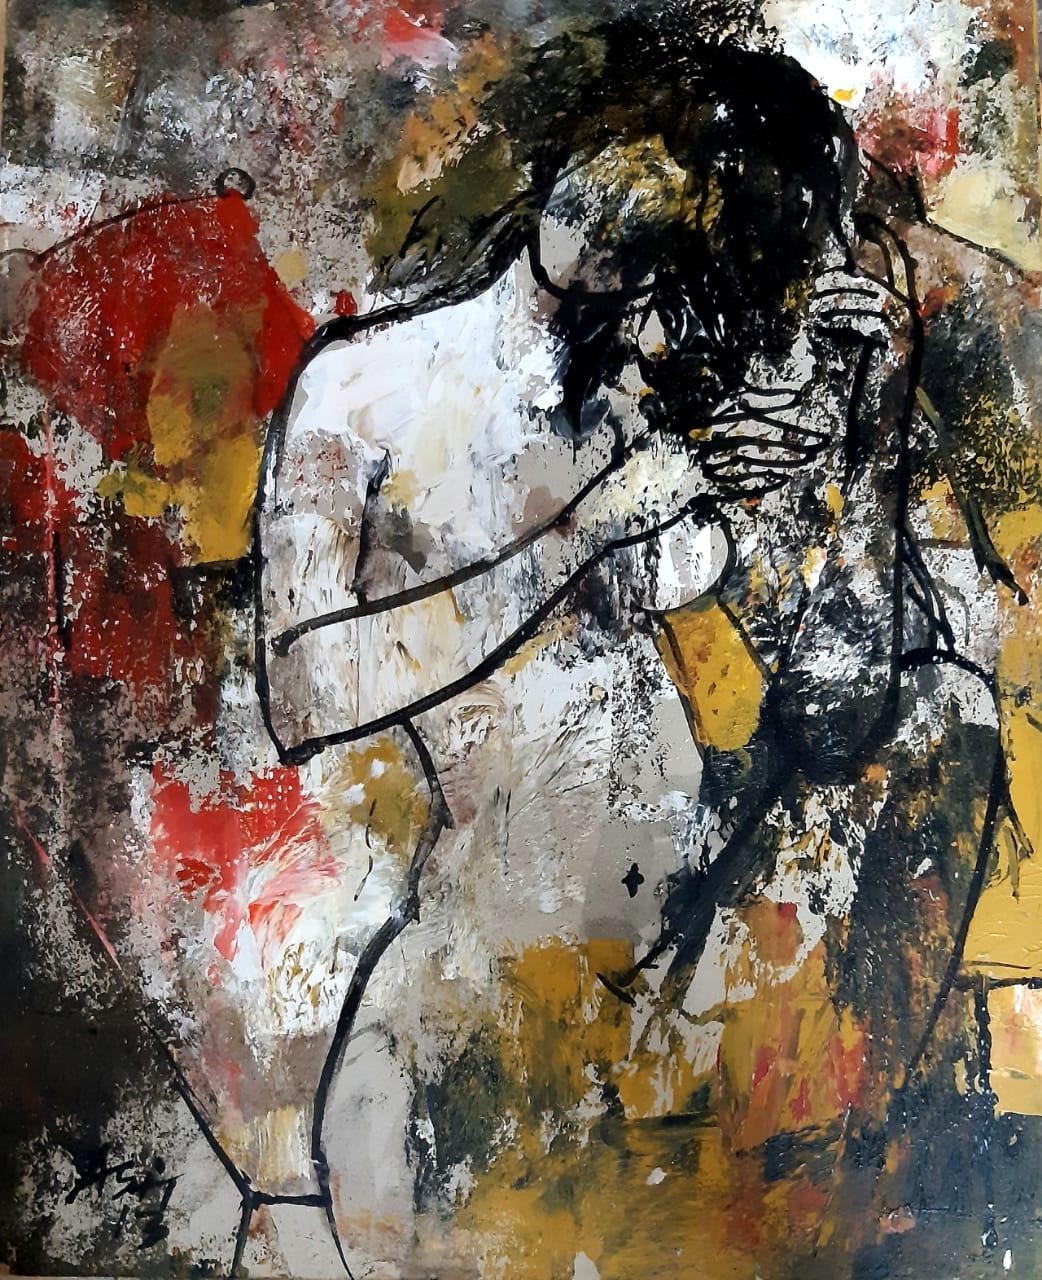 Ashit Sarkar Nude Painting - Nude Woman, Acrylic on Canvas, Red, Yellow, Black by Indian Artist "In Stock"